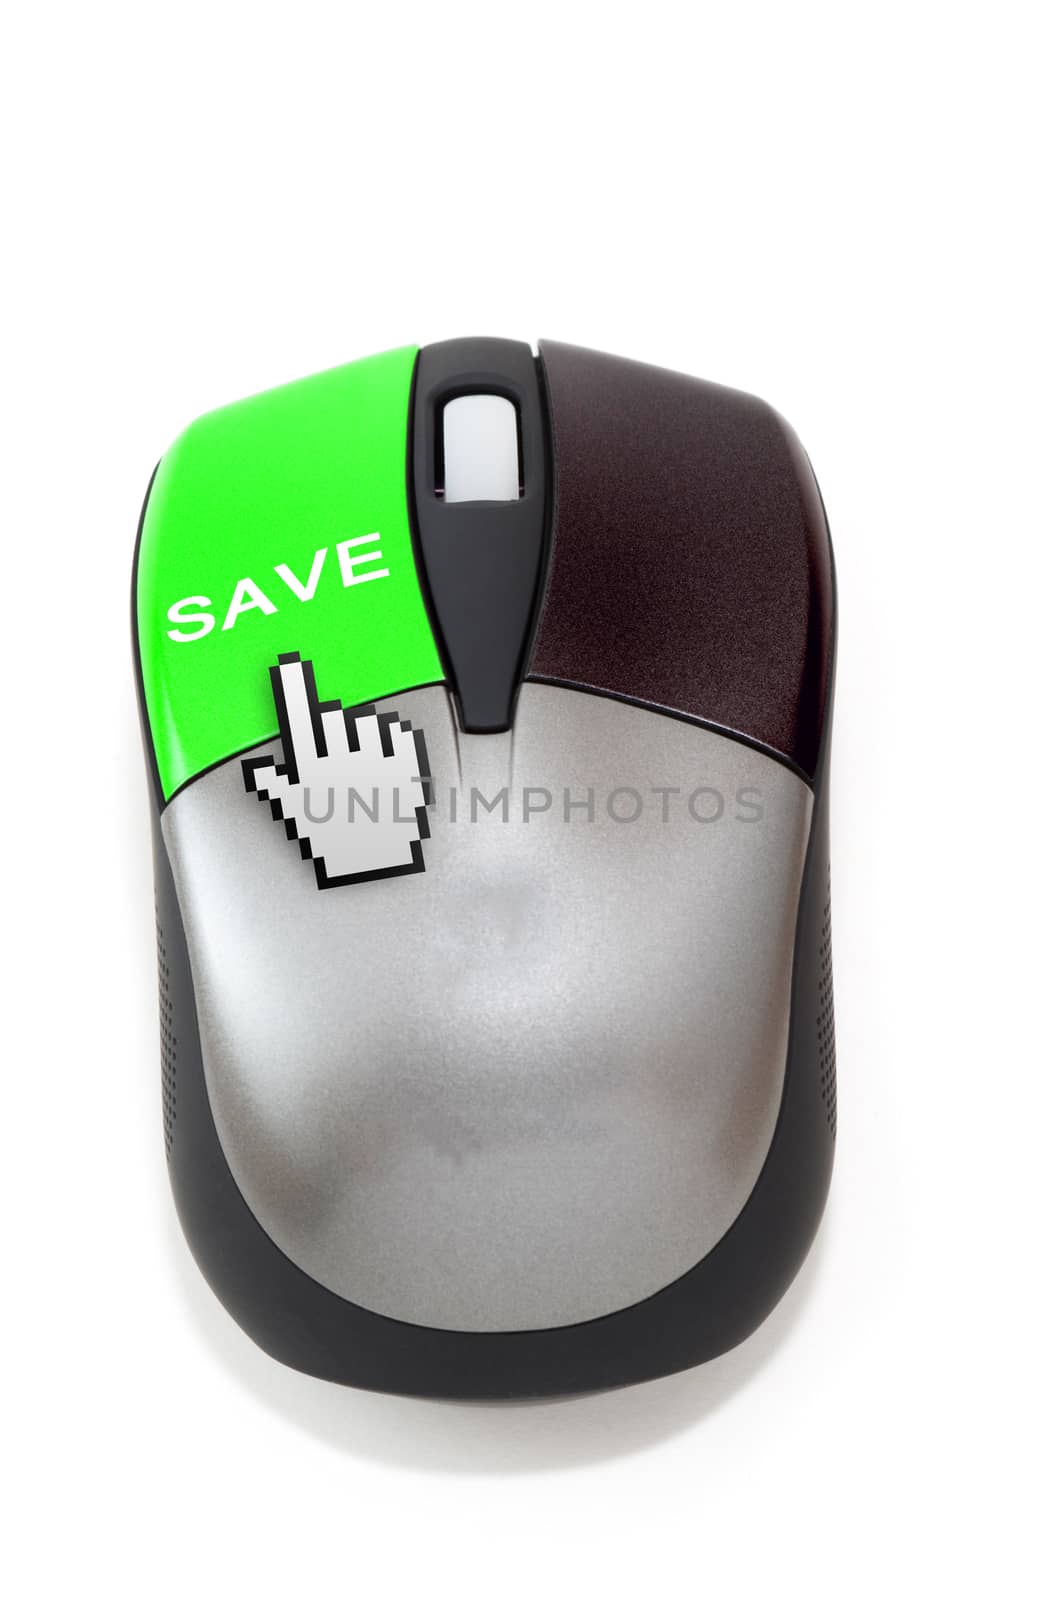 Hand cursor clicking on save button